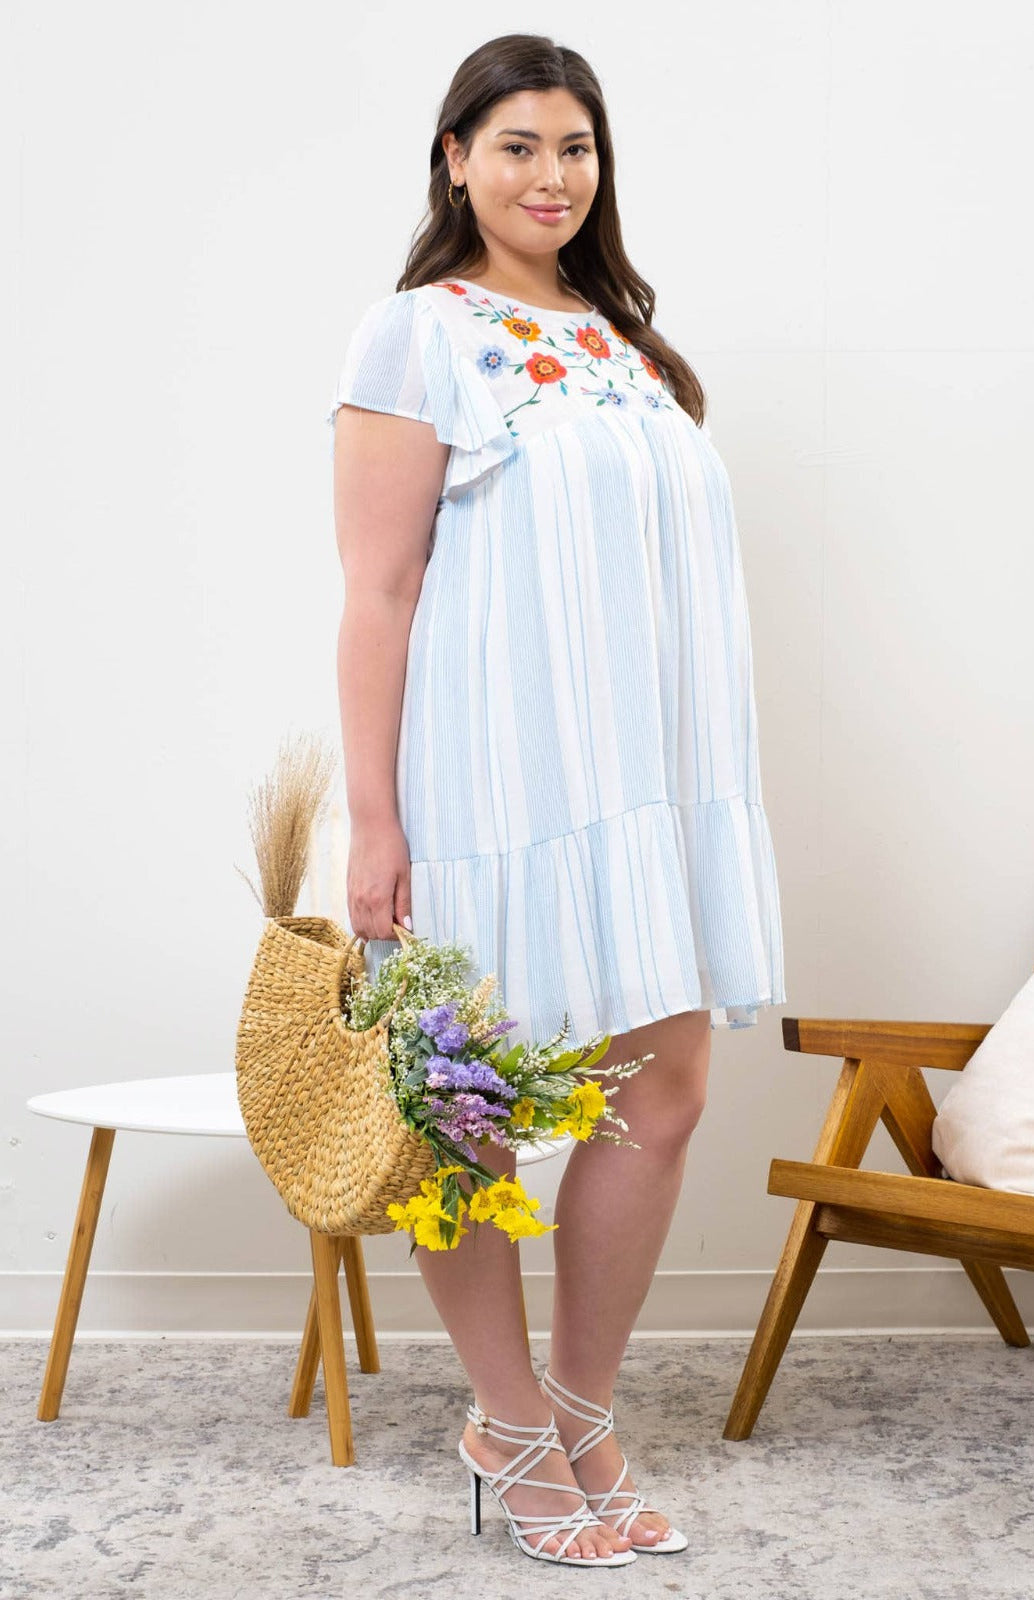 Plus Size Striped Dress with Floral Embroidery in Blue, White and Red Cute Hues